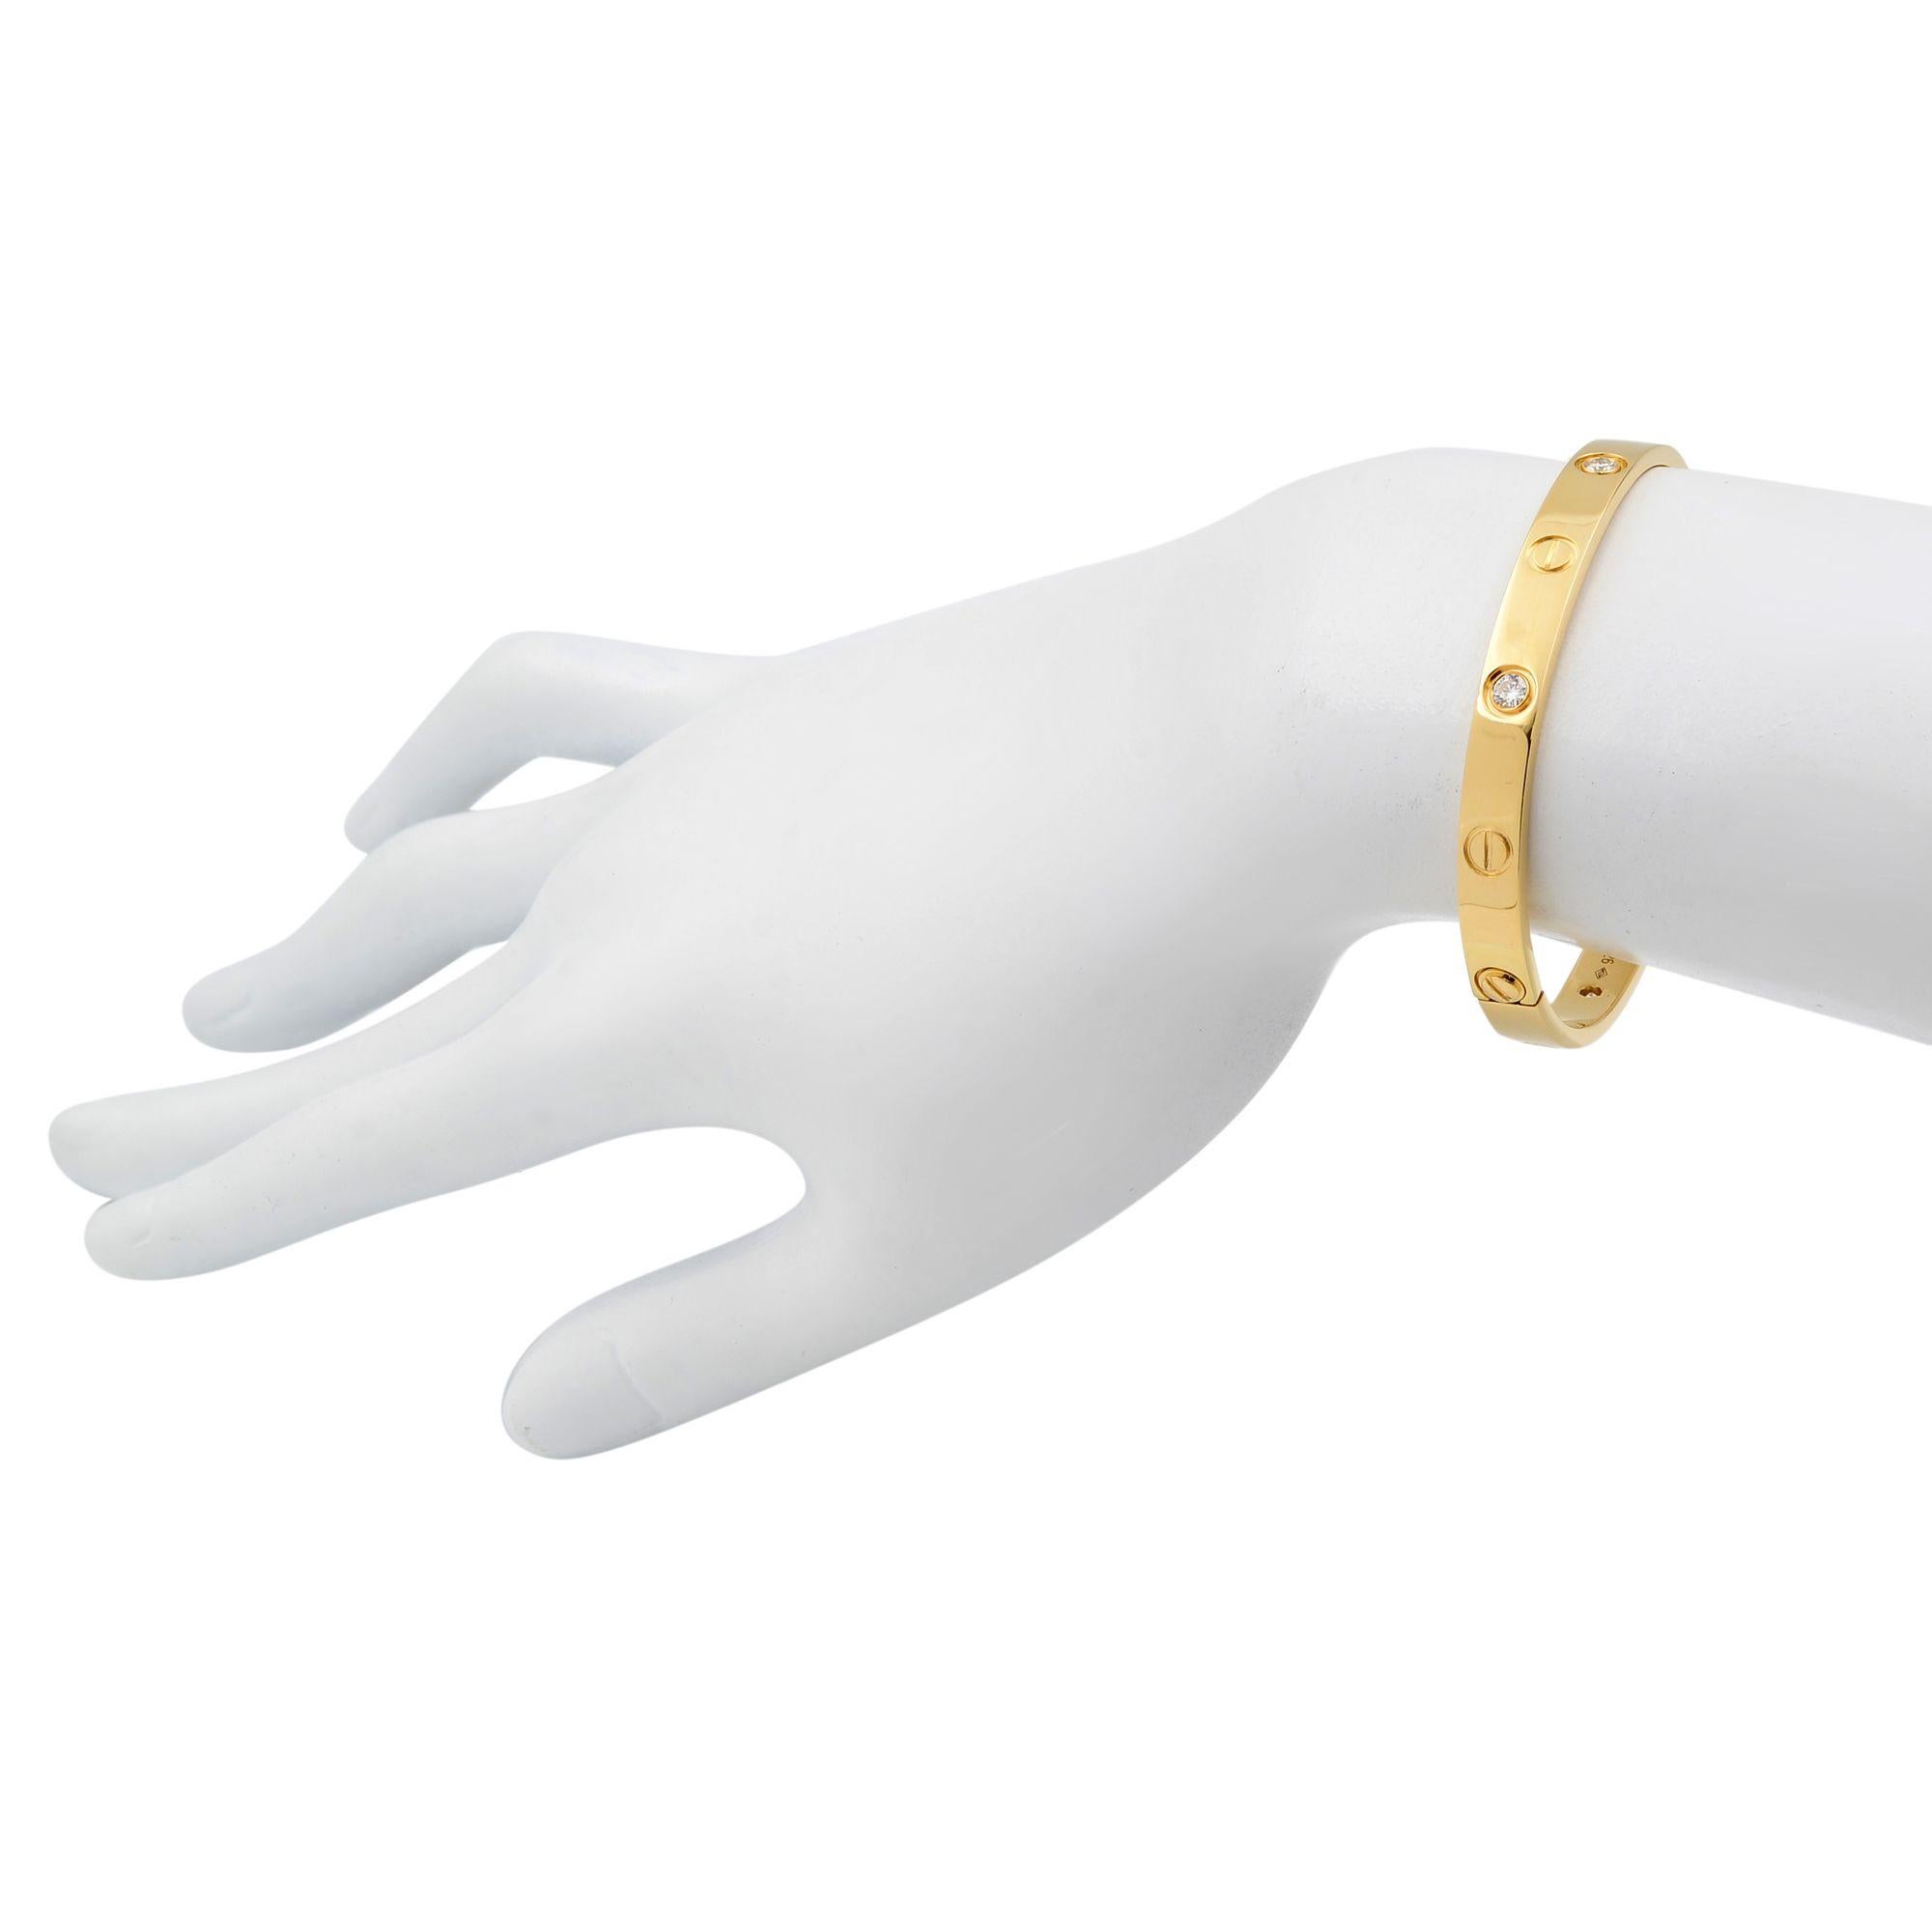 Cartier Love 18 Karat Yellow Gold 4 Diamond Bracelet In Excellent Condition In New York, NY